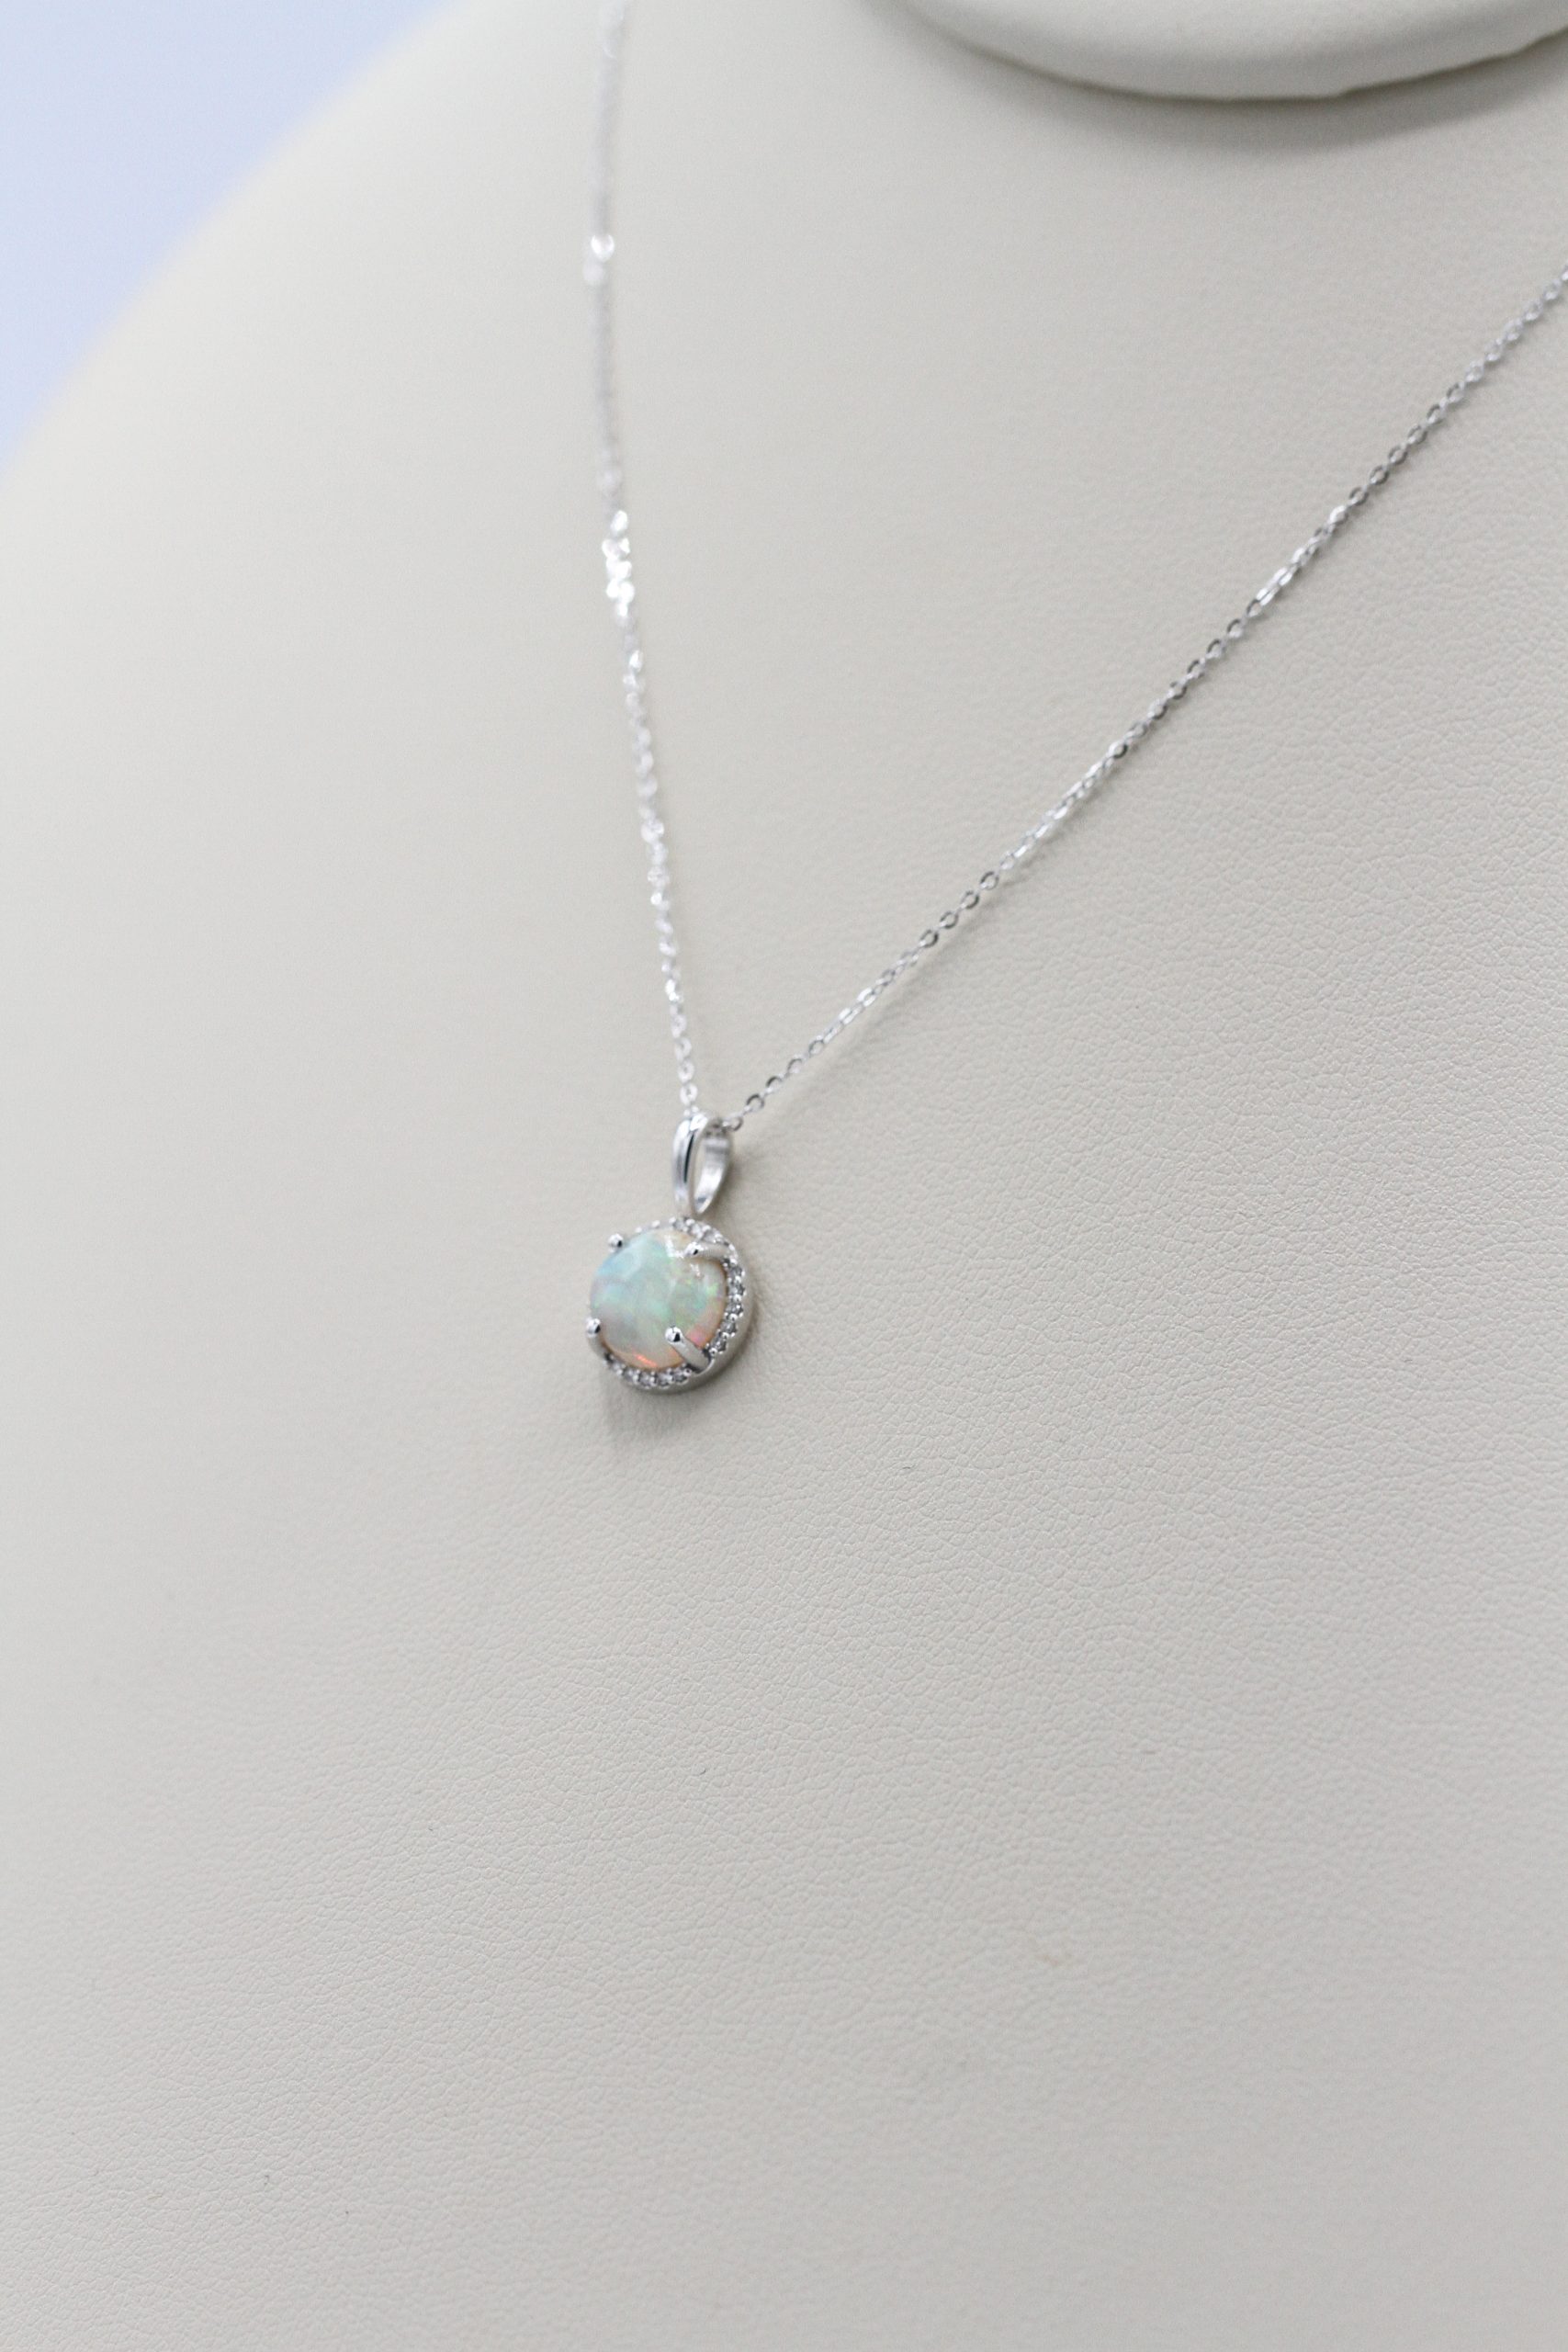 A necklace with a round shaped gemstone